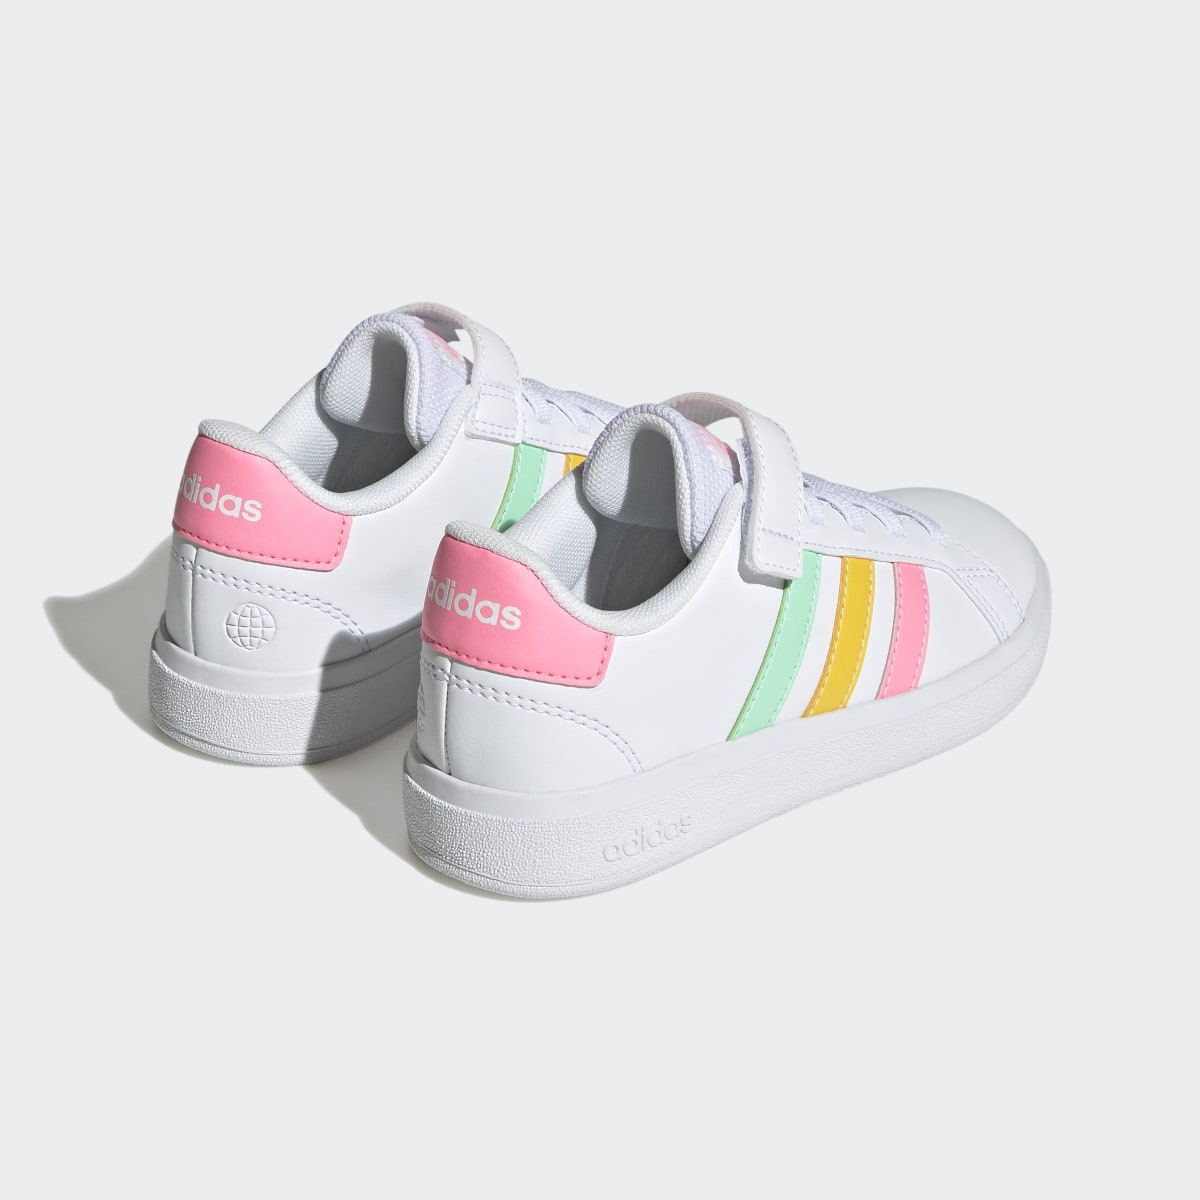 Adidas Grand Court Elastic Lace and Top Strap Shoes. 6